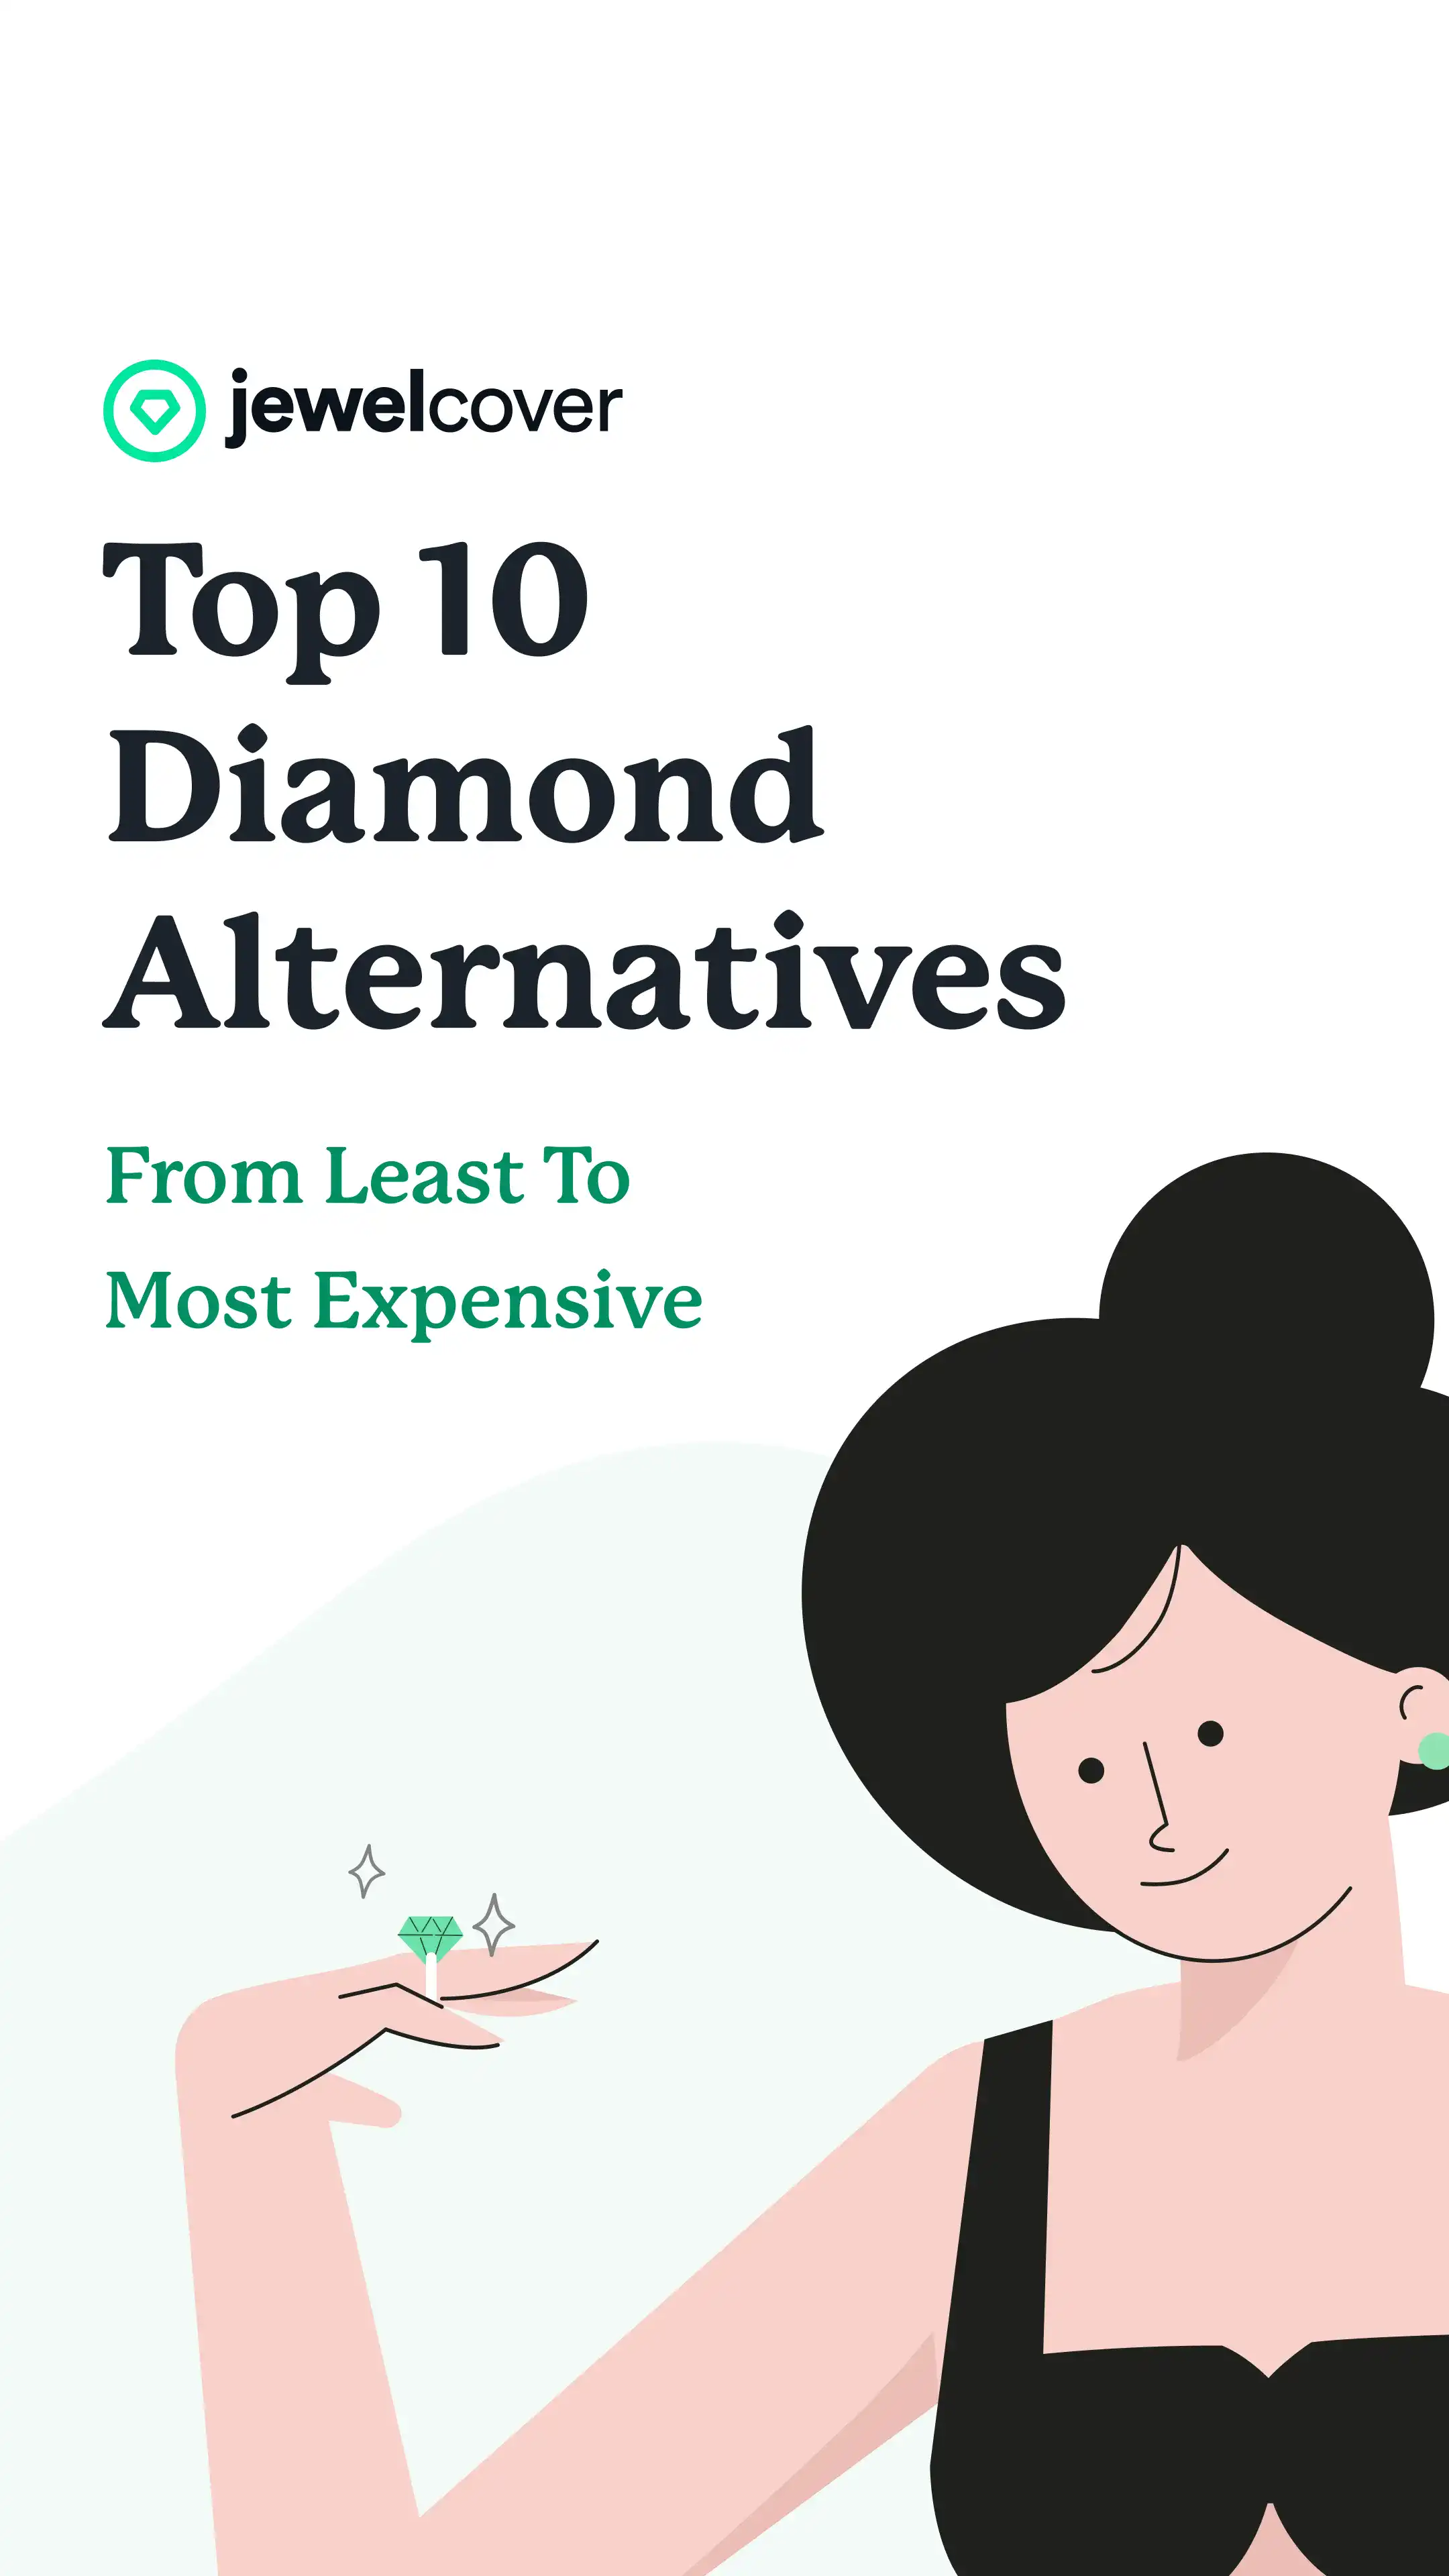 10 Diamond Alternatives From Least to Most Expensive